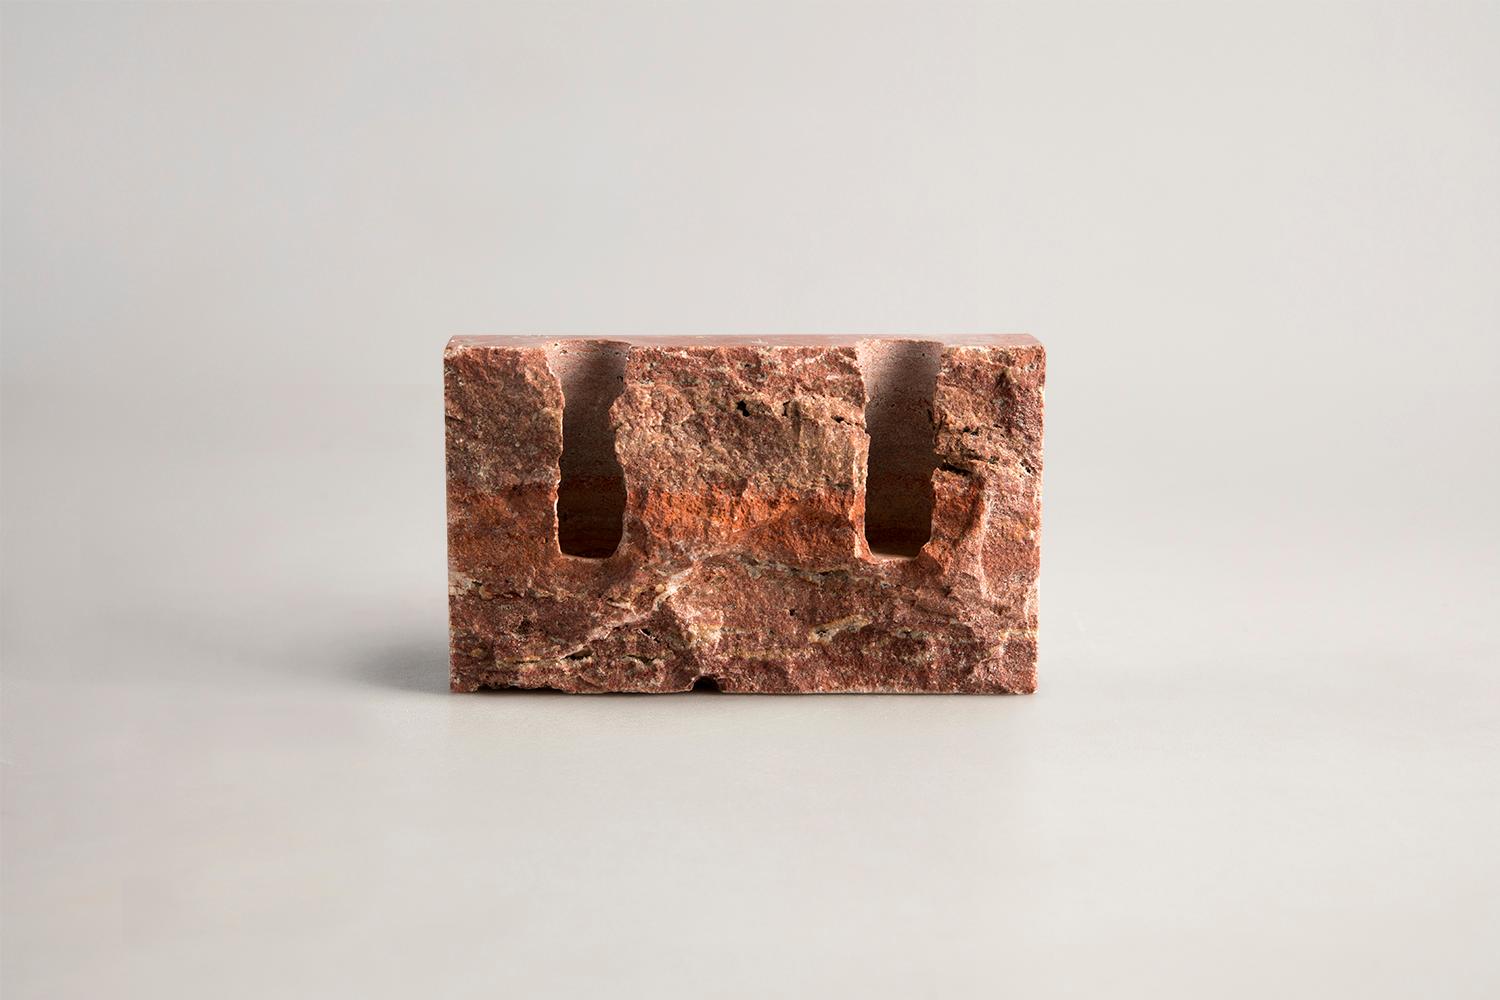 Handcrafted candle holder in Persian travertine with rock face front (hand chipped) and smooth sides. Please note that each stone is unique and reacts differently, therefore important variations in colour, shape and texture occur. 

Snug candle